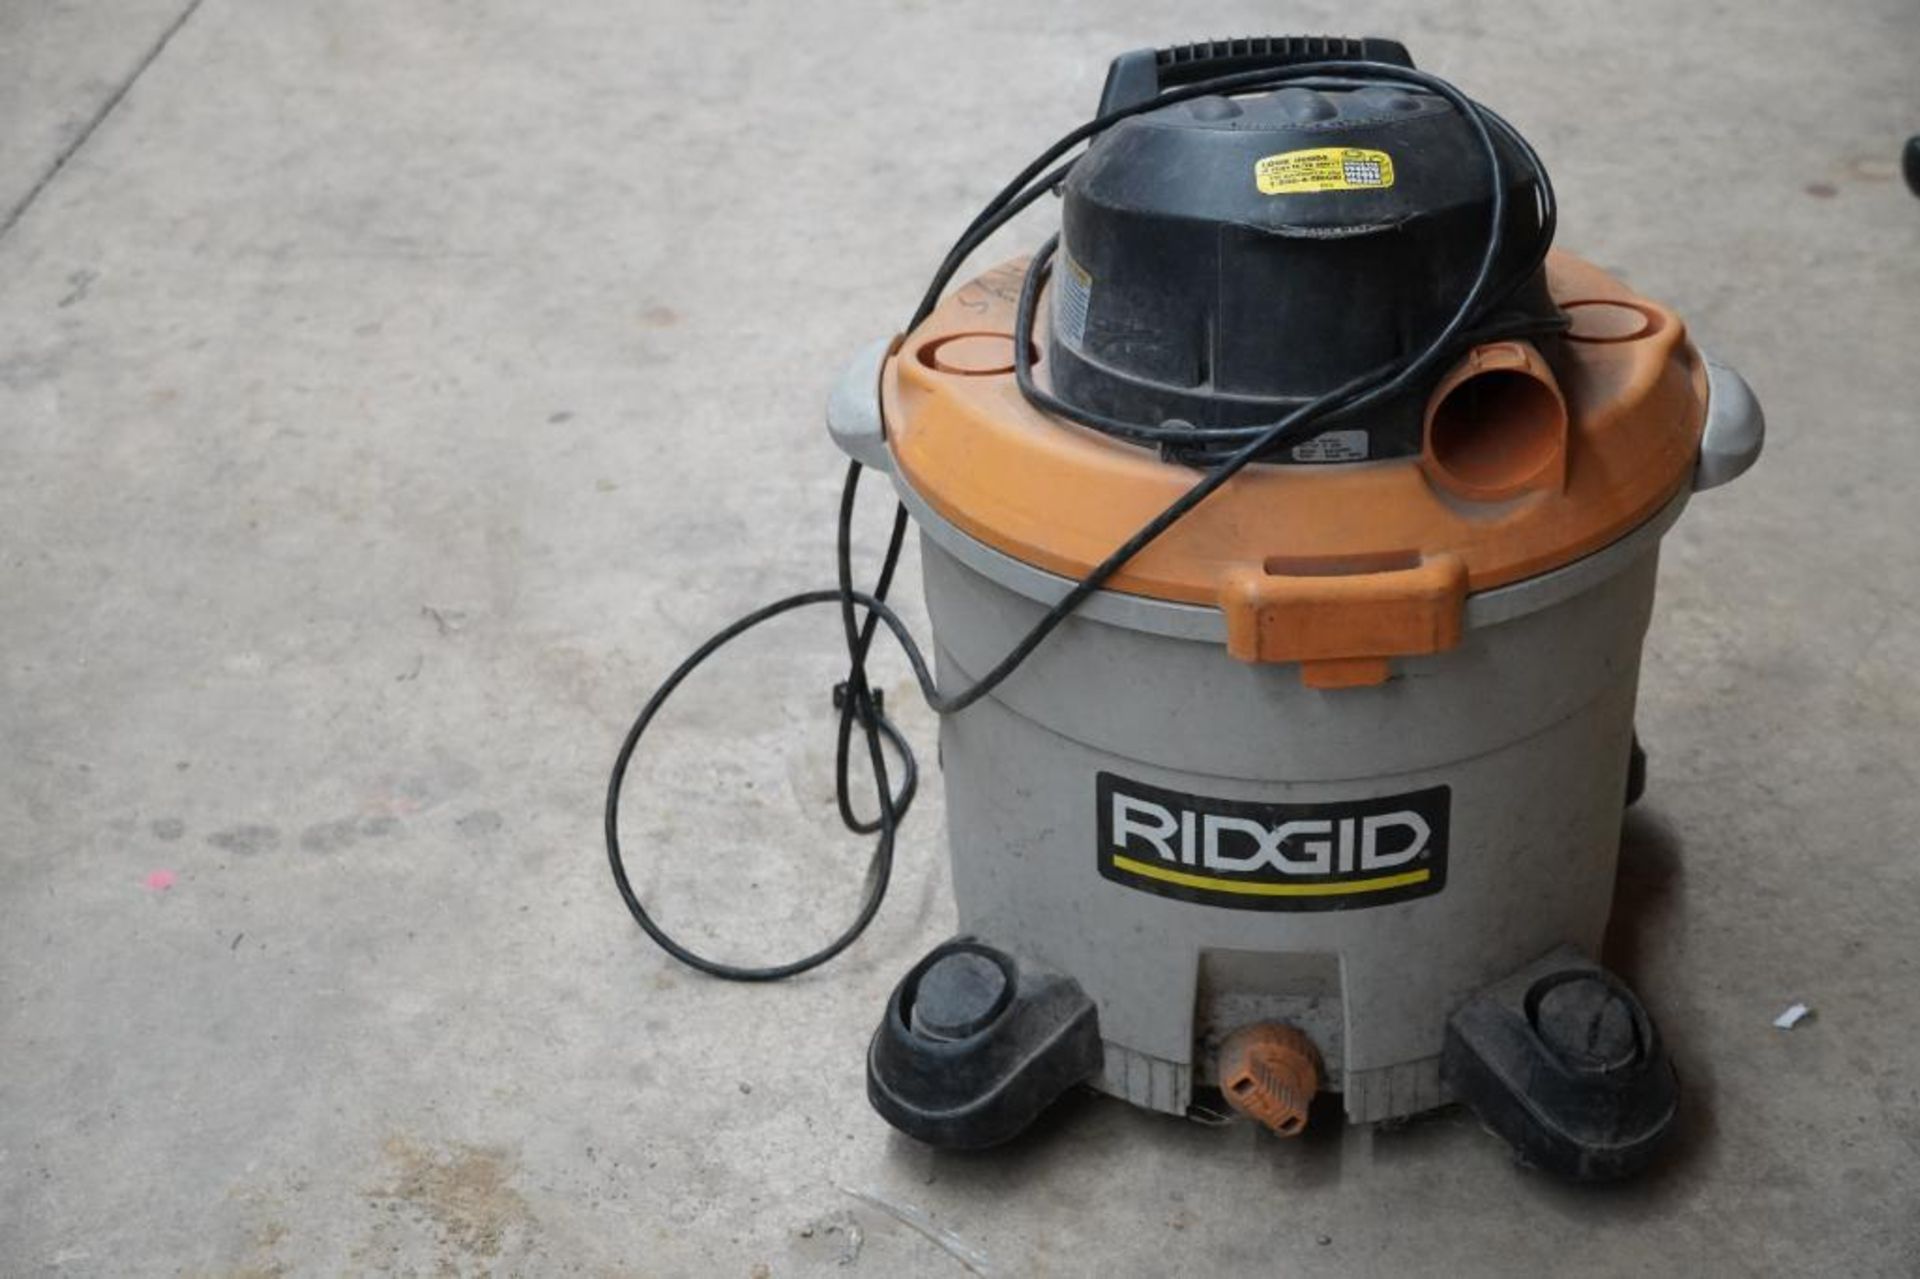 Cellulose Insulation Blower and Ridgid Shop Vac - Image 10 of 10